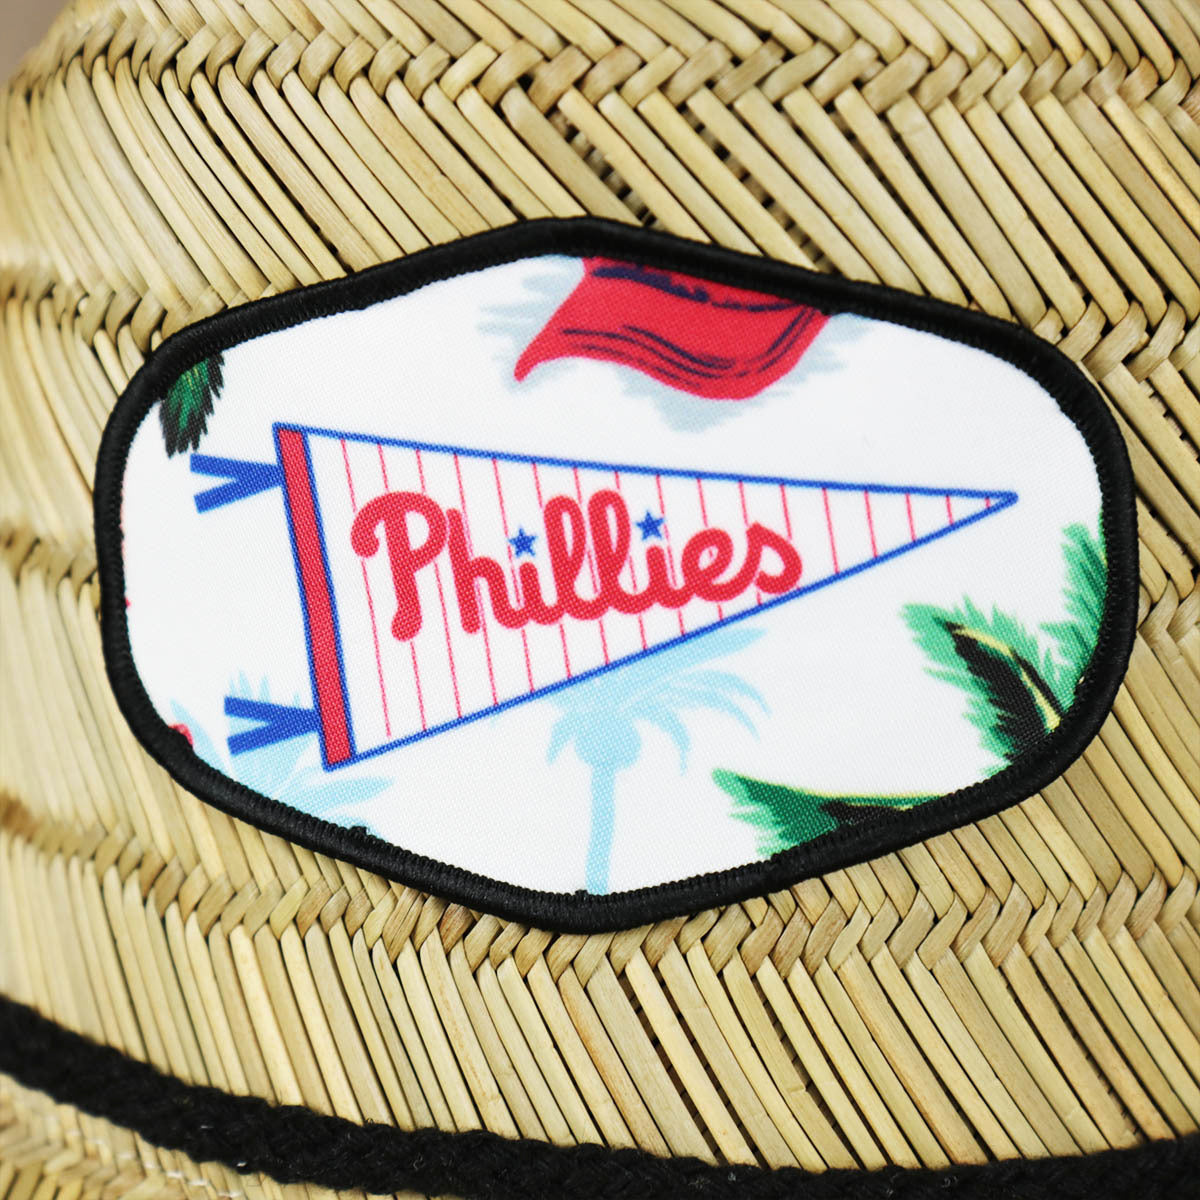 A close up of the Phillis emblem on the Philadephia Phillies Straw Life Guard Hat Reyn Spooner